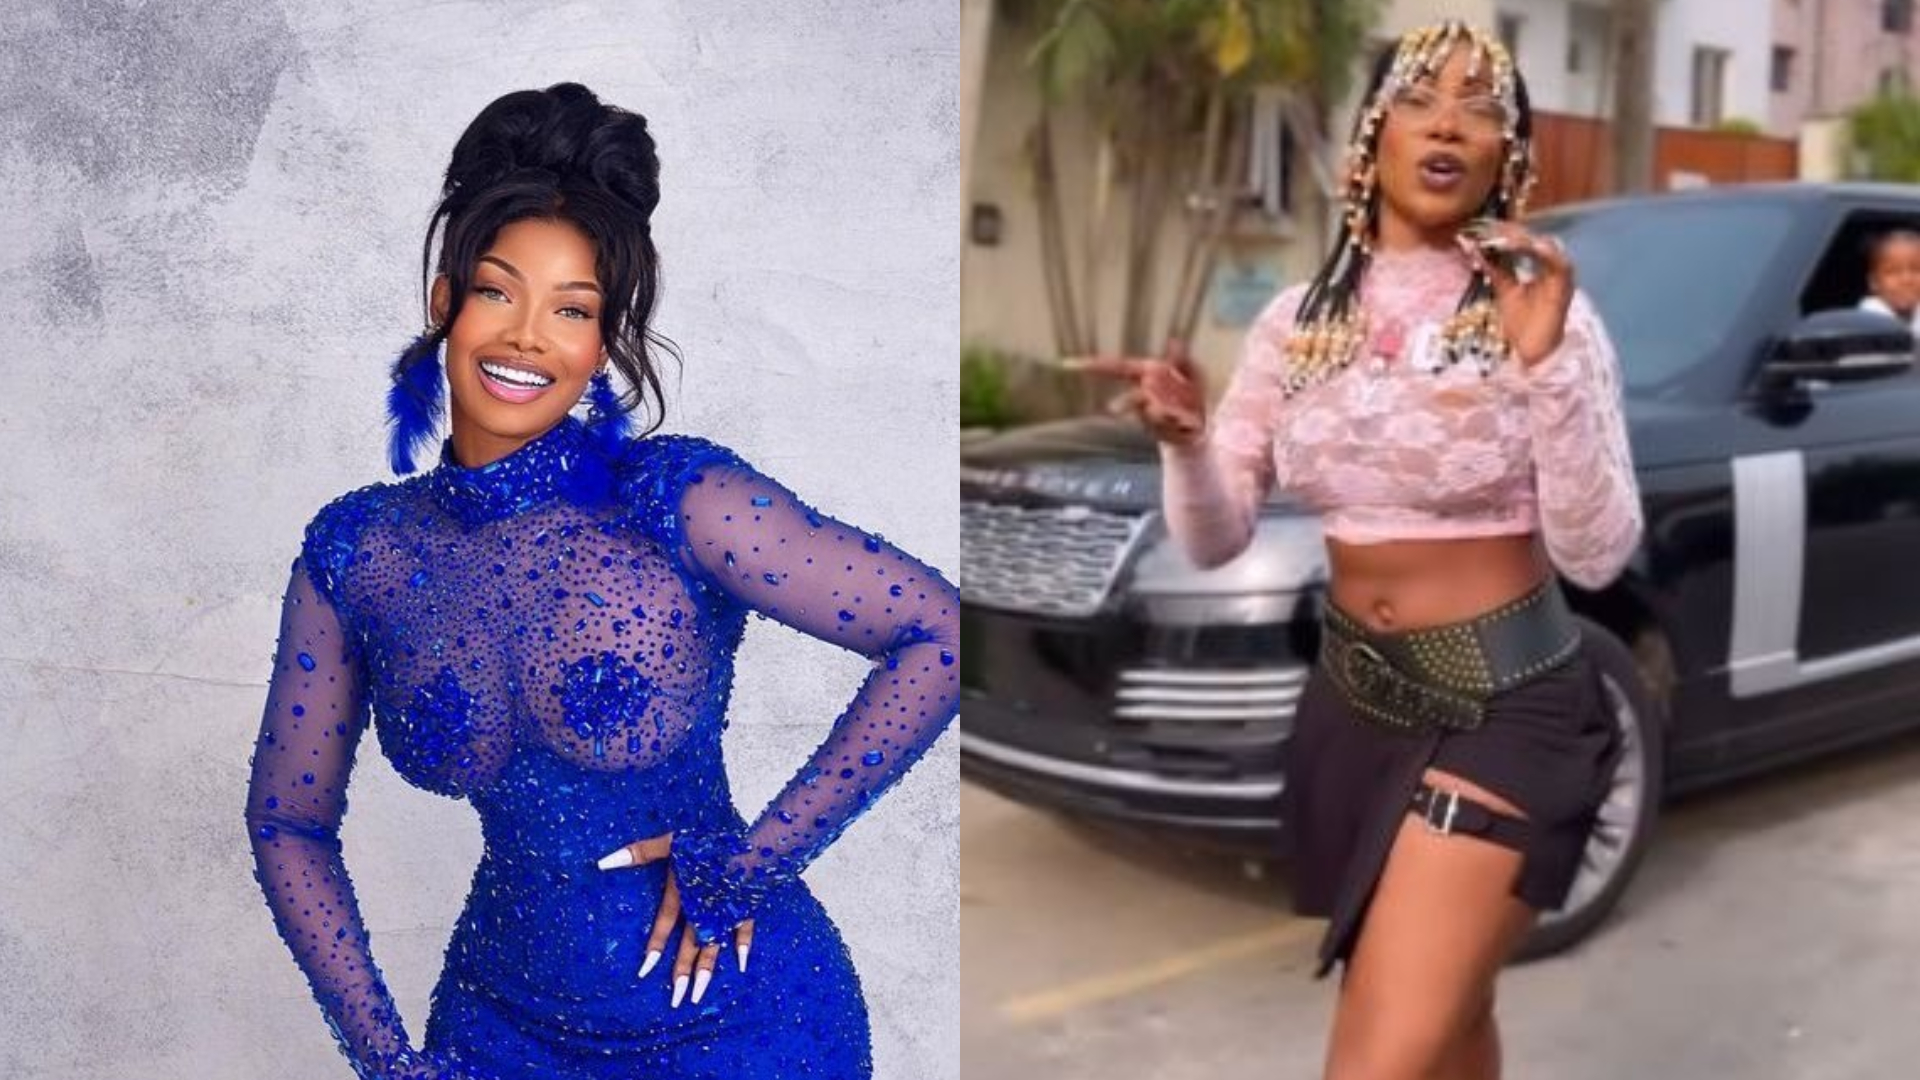 "I'm the most hated girl in Nigeria, because I am smart..." - Tacha spills, hops in on new challenge